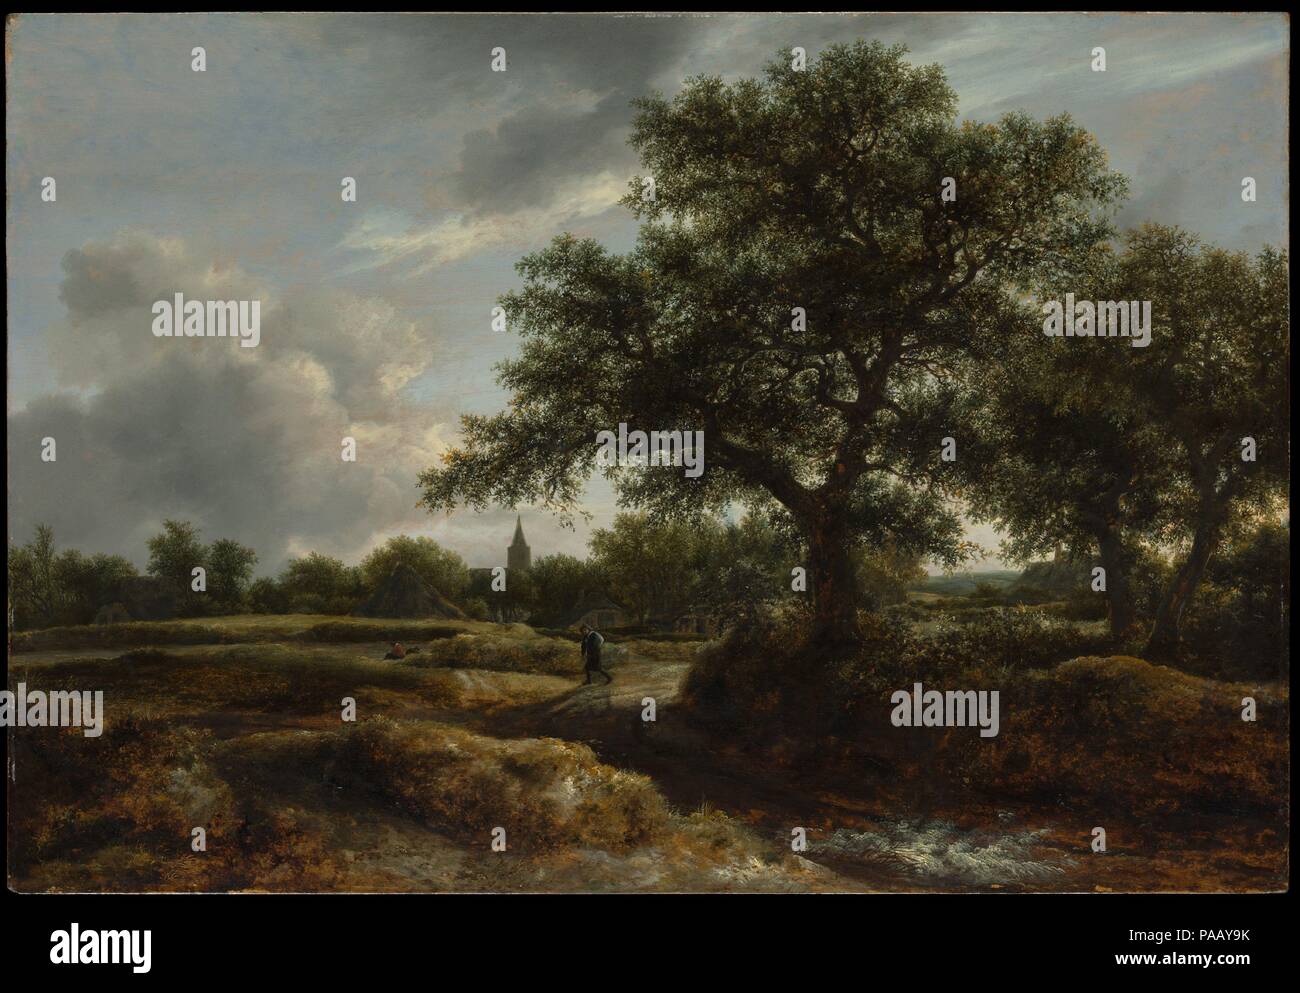 Landscape with a Village in the Distance. Artist: Jacob van Ruisdael (Dutch, Haarlem 1628/29-1682 Amsterdam). Dimensions: 30 x 43 in. (76.2 x 109.2 cm). Date: 1646.  This ambitious picture is one of nine known landscape paintings that bear the earliest date found on works by Van Ruisdael, 1646. At the time the artist was about eighteen years old. Youthful exuberance and some losses of paint and glazes combine to make the topography in the foreground somewhat unclear. However, the naturalistic description of foliage and the dramatic presentation of trees forecast the future of Holland's greates Stock Photo